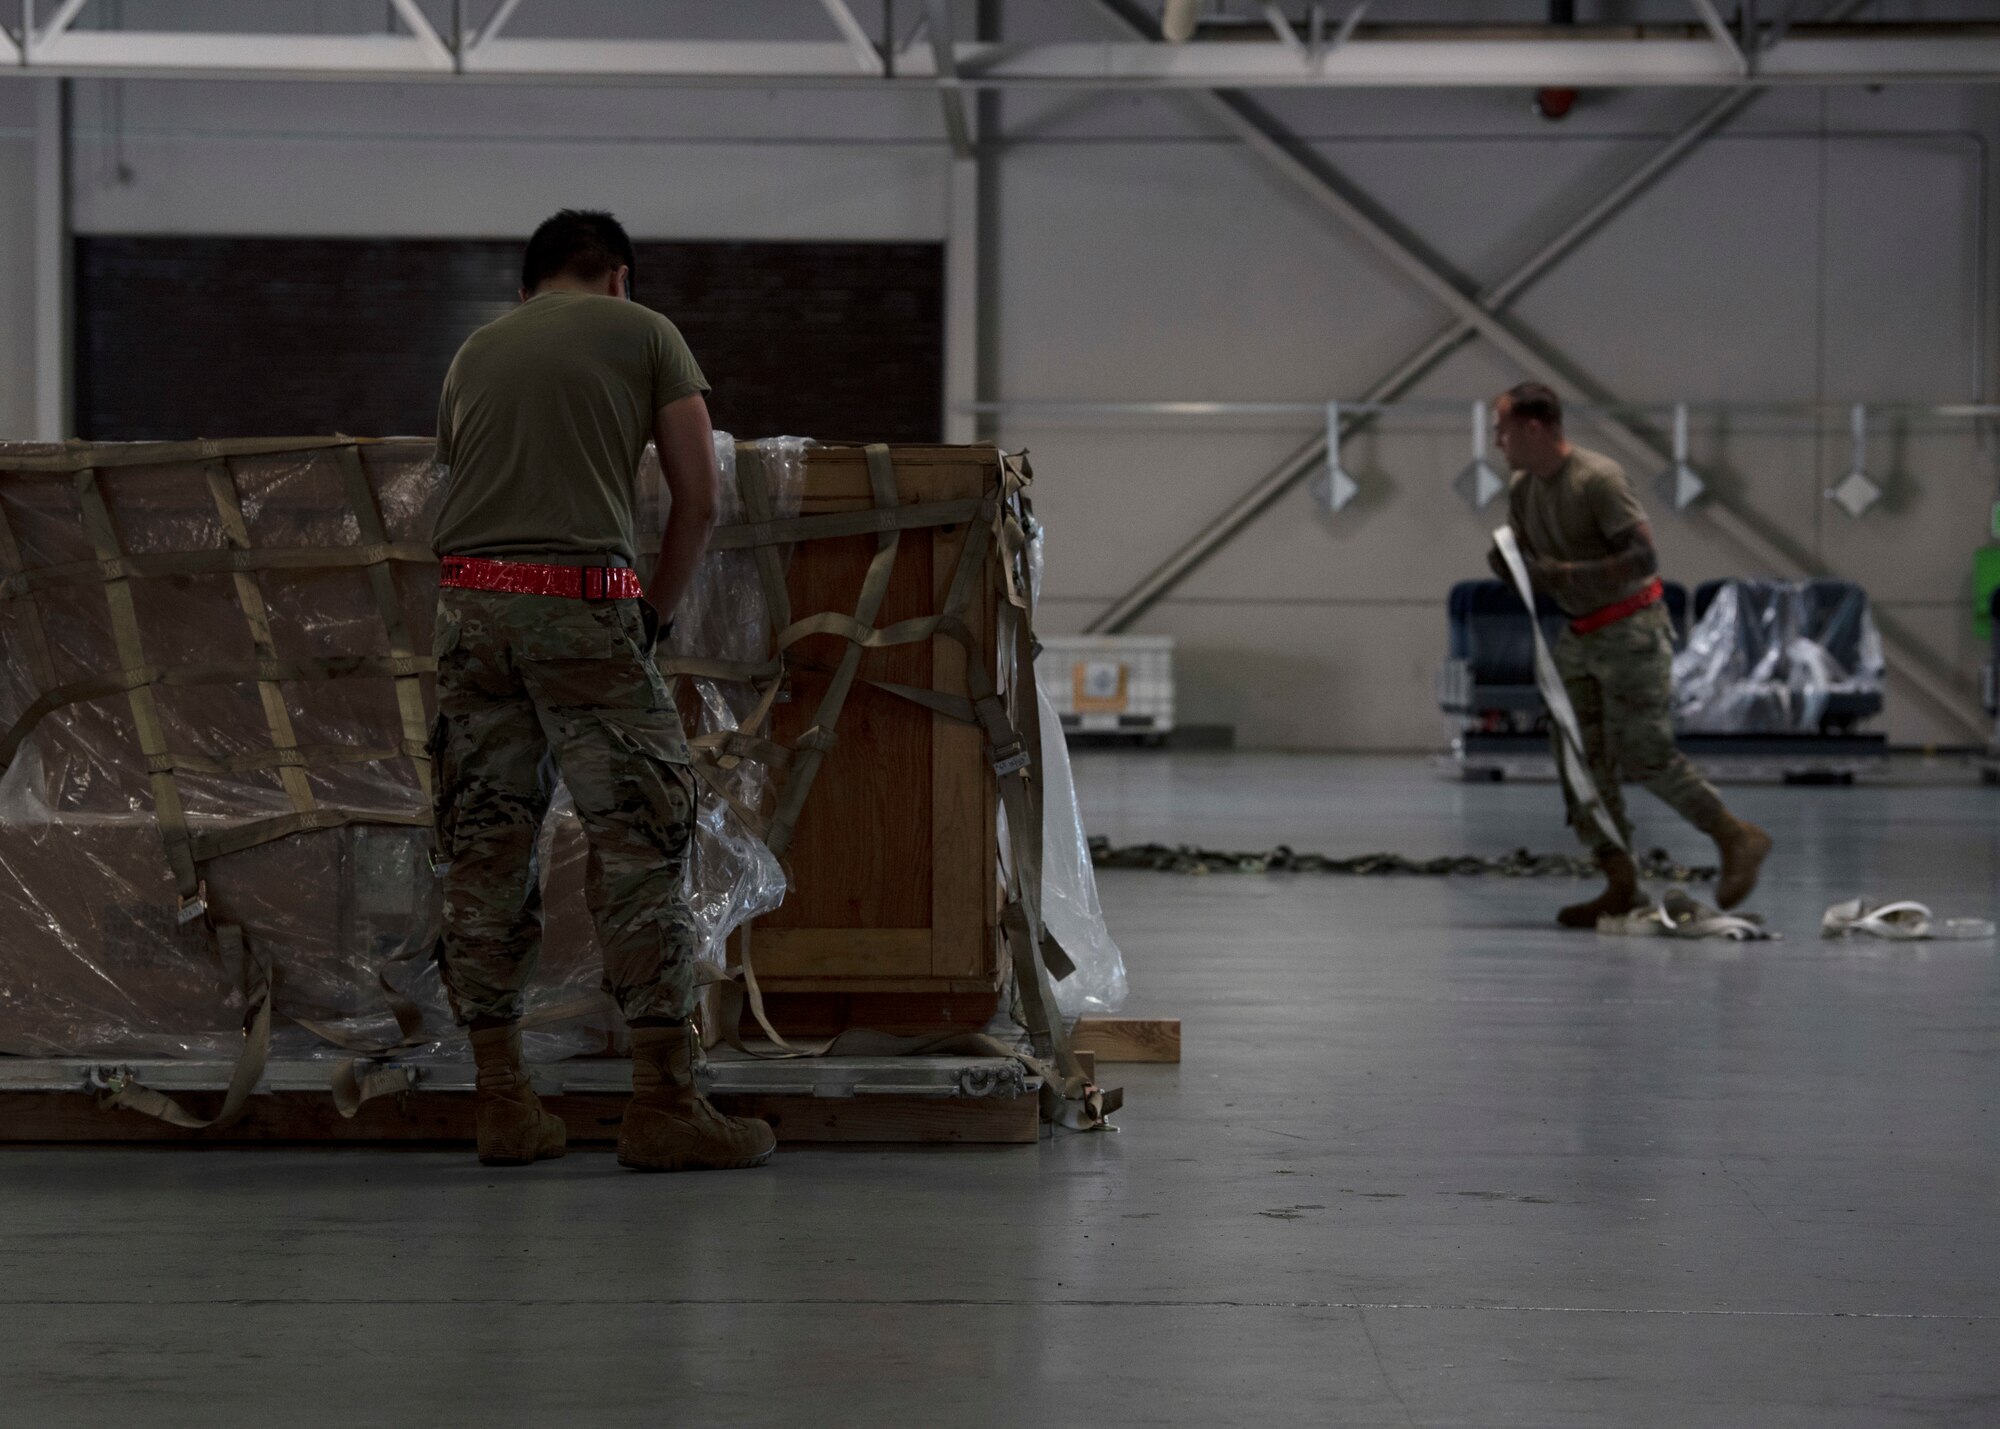 (From left) U.S. Air Force Airman 1st Class Gian Barranco and Airman 1st Class Clay Huddleston, both ramp operations representatives with the 62nd Aerial Port Squadron, participate in a pallet building challenge as part of the Eagle Port Rodeo Team tryouts at Joint Base Lewis-McChord, Washington, June 24, 2021. The chosen team will receive an opportunity to represent the 62nd APS at a Port Dawgs competition at Joint Base Pearl Harbor-Hickam, Hawaii. (U.S. Air Force photo by Senior Airman Zoe Thacker)